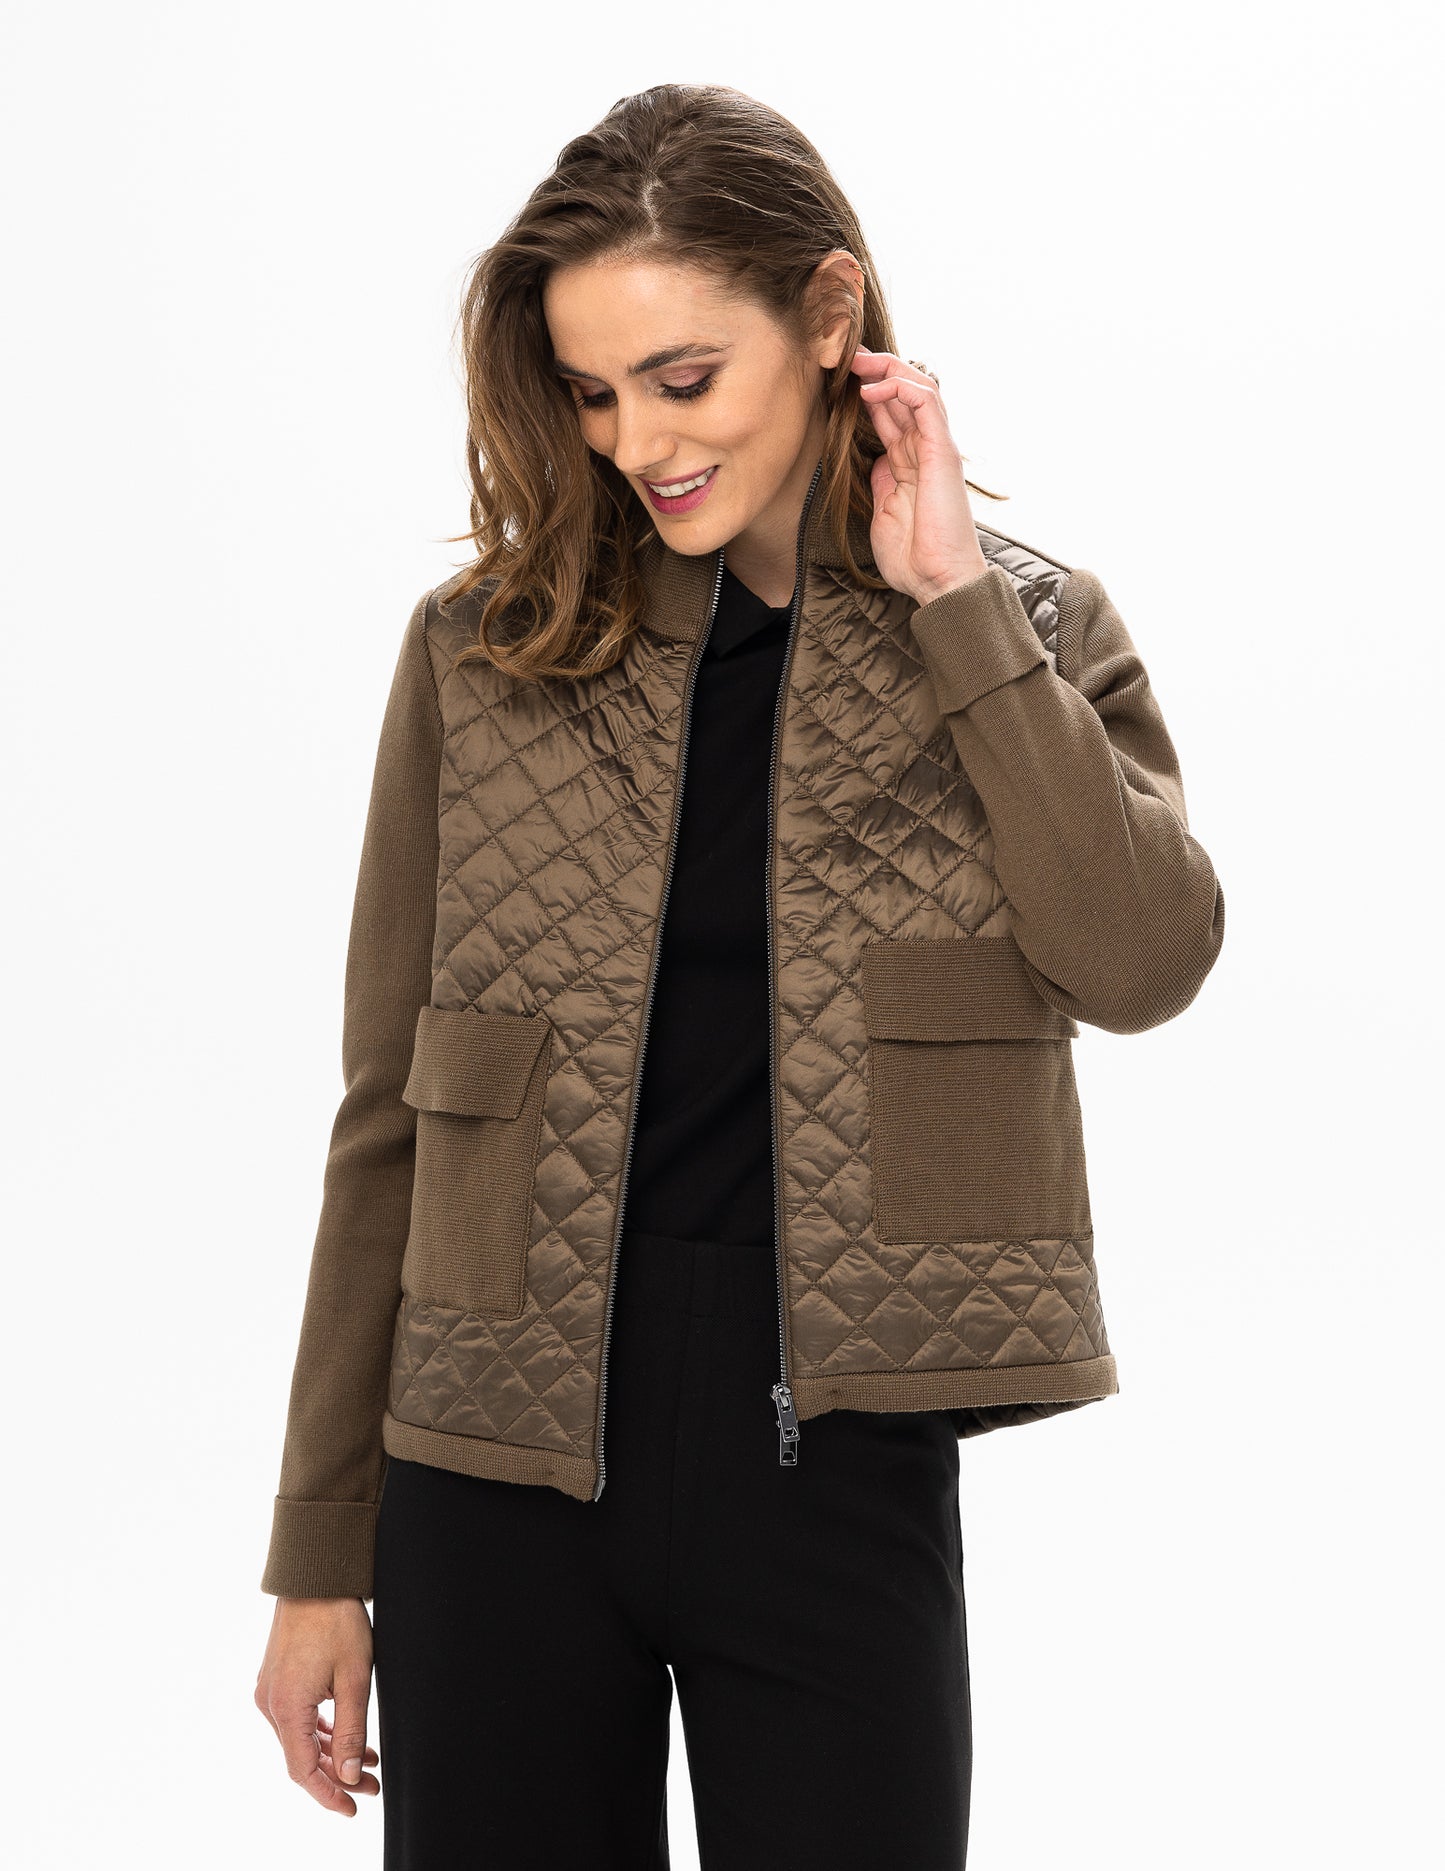 Quilted Jacket with Knit Sleeves - Chocolate